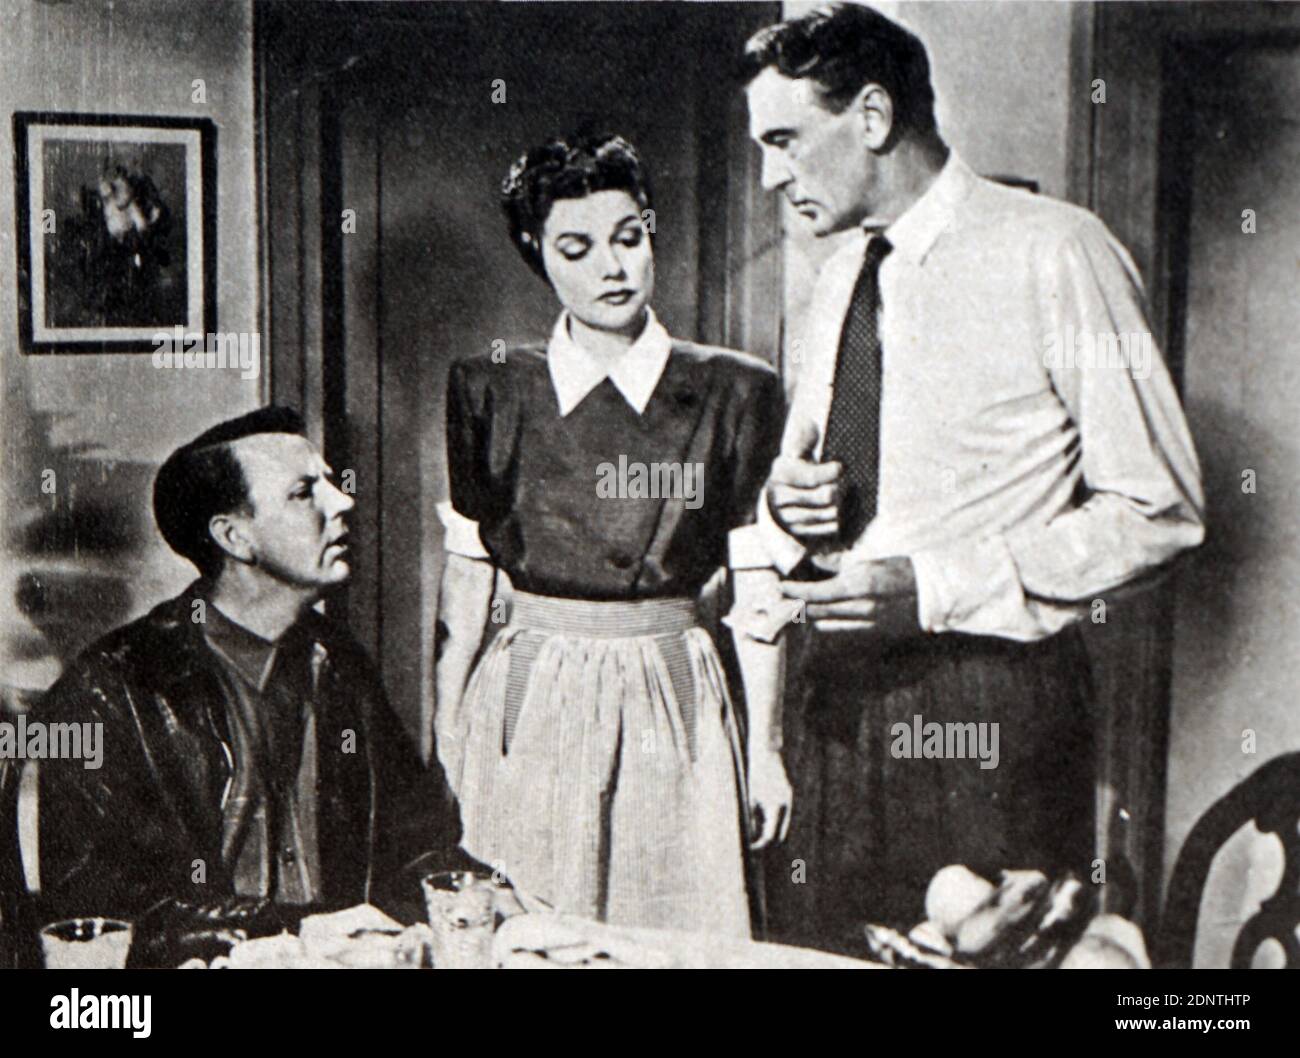 Film still from 'Good Sam' starring Gary Cooper, Ann Sheridan, Ray Collins, and Joan Lorring. Stock Photo